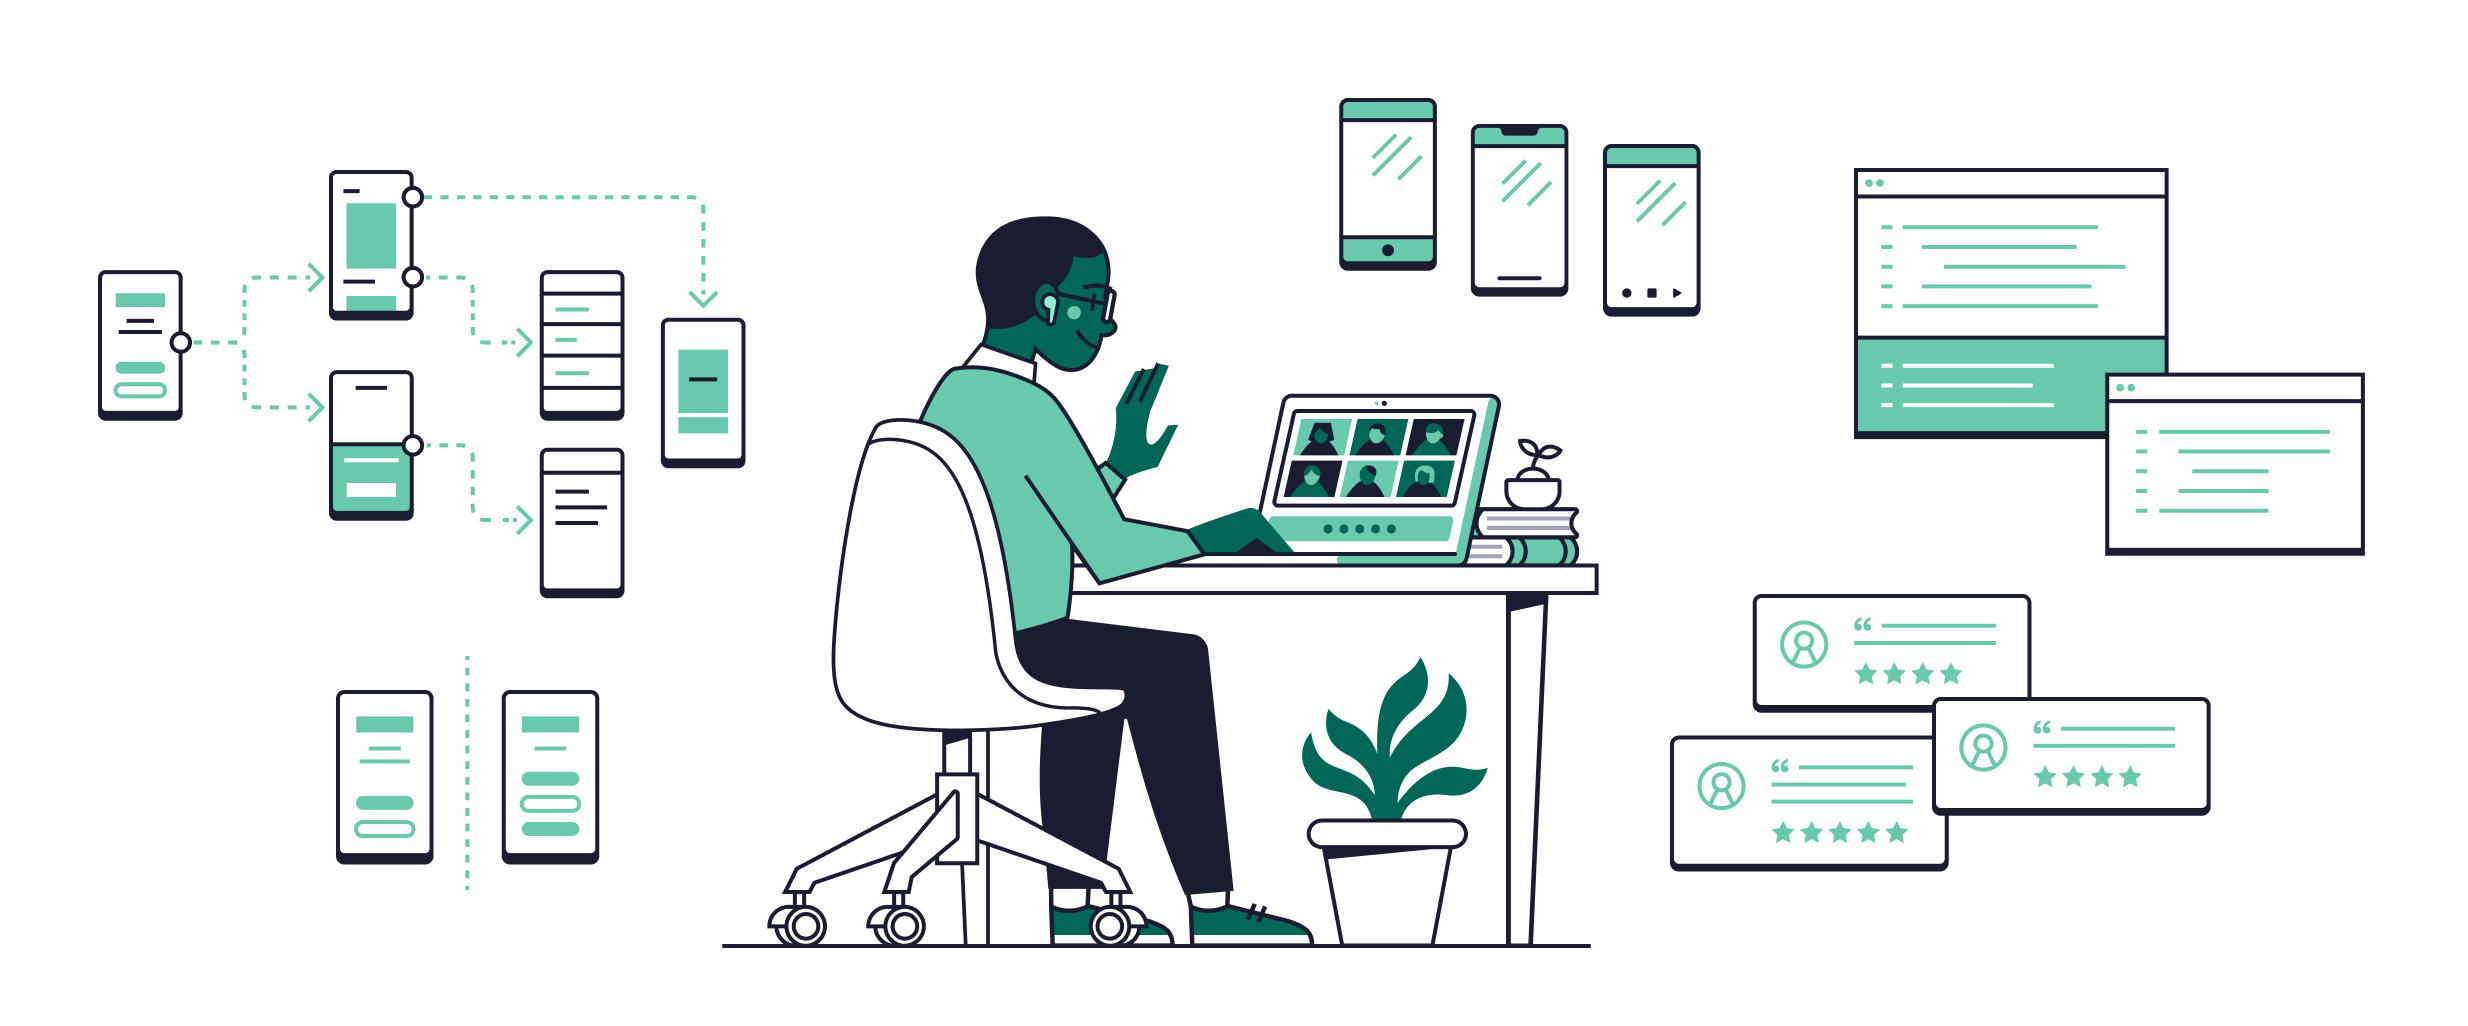 An illustration of a remote worker